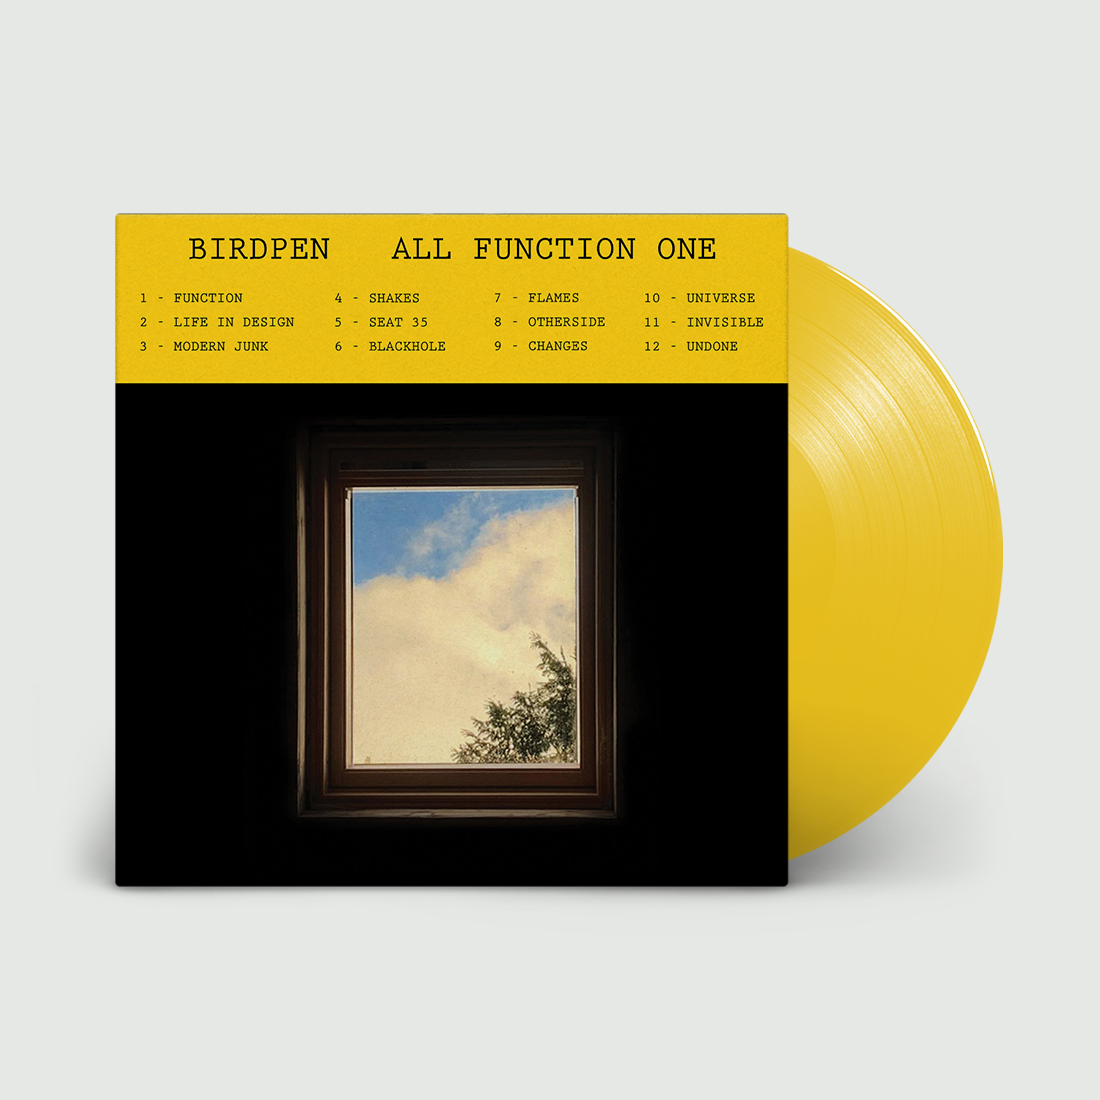 All Function One: Limited Edition Sunflower Yellow Vinyl LP